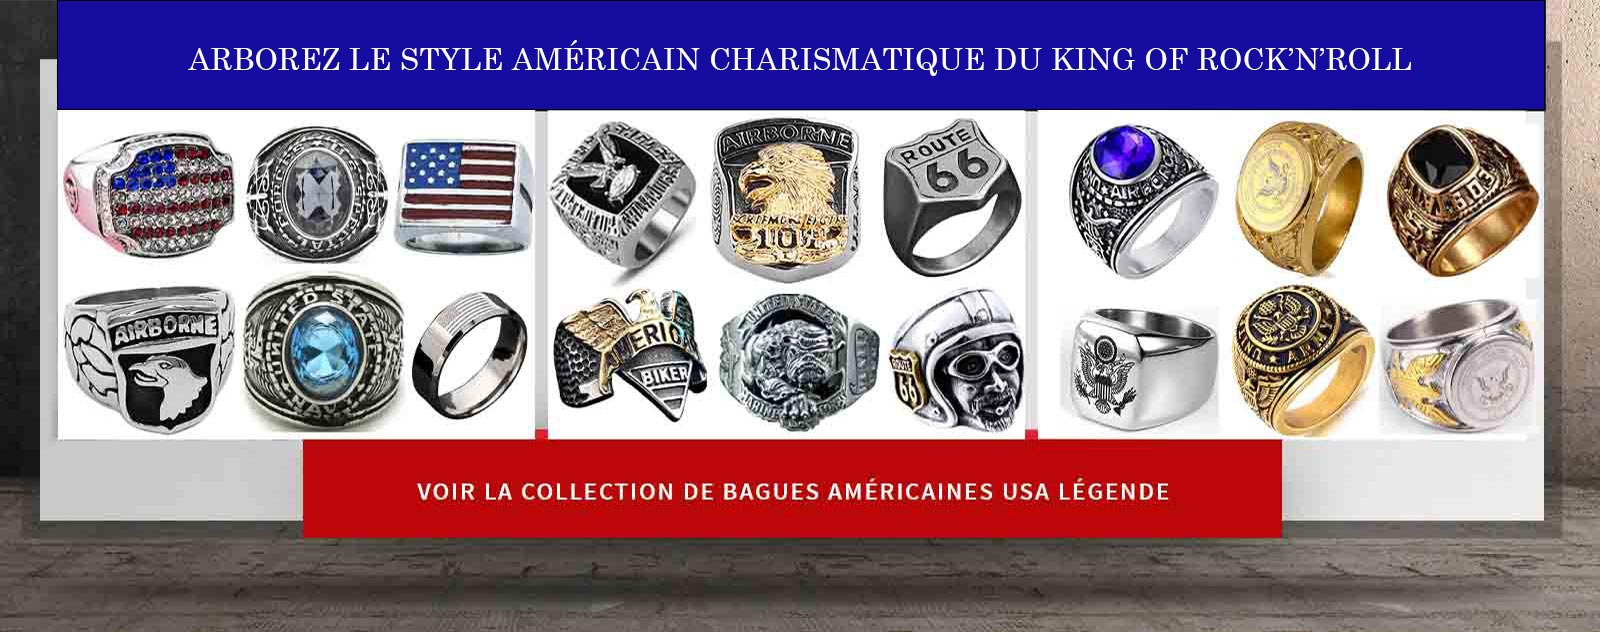 banniere vers collection bagues americaines